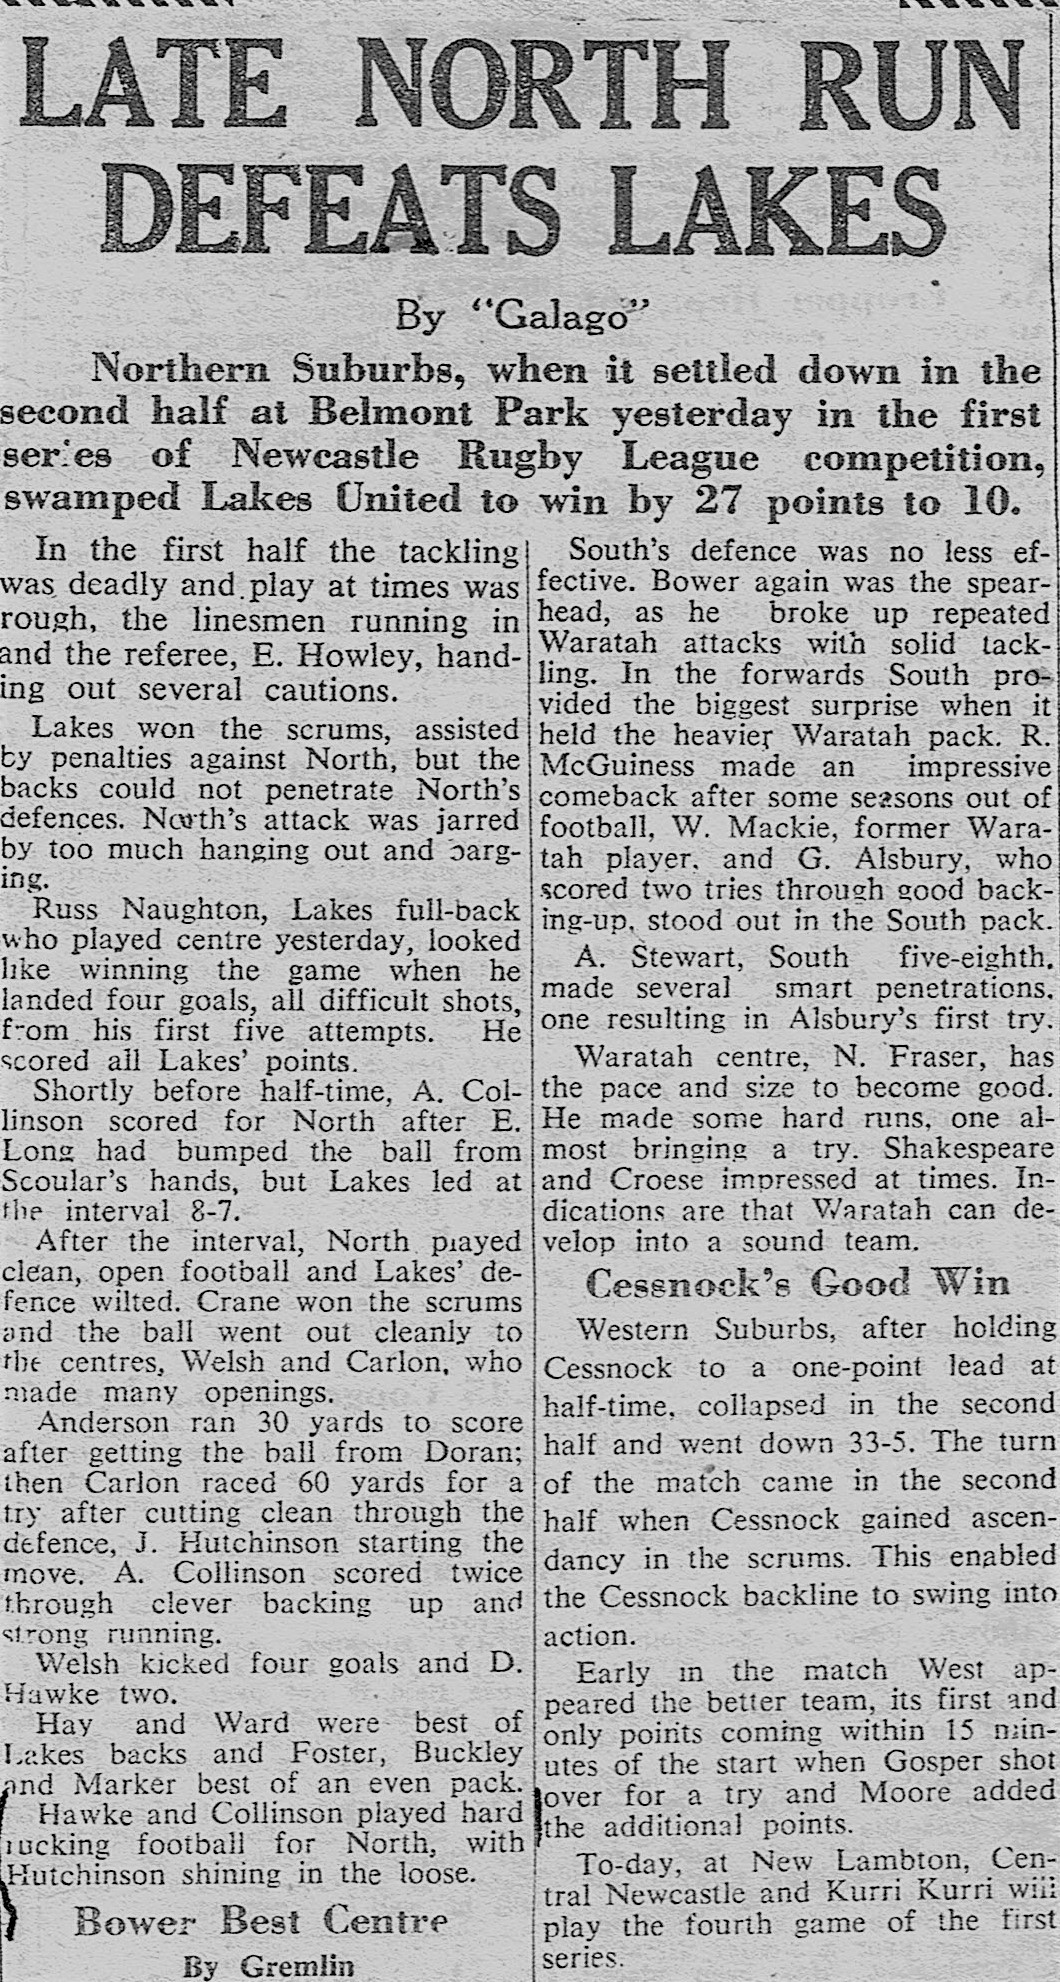 Northern Suburbs defeat Lakes United 1950.